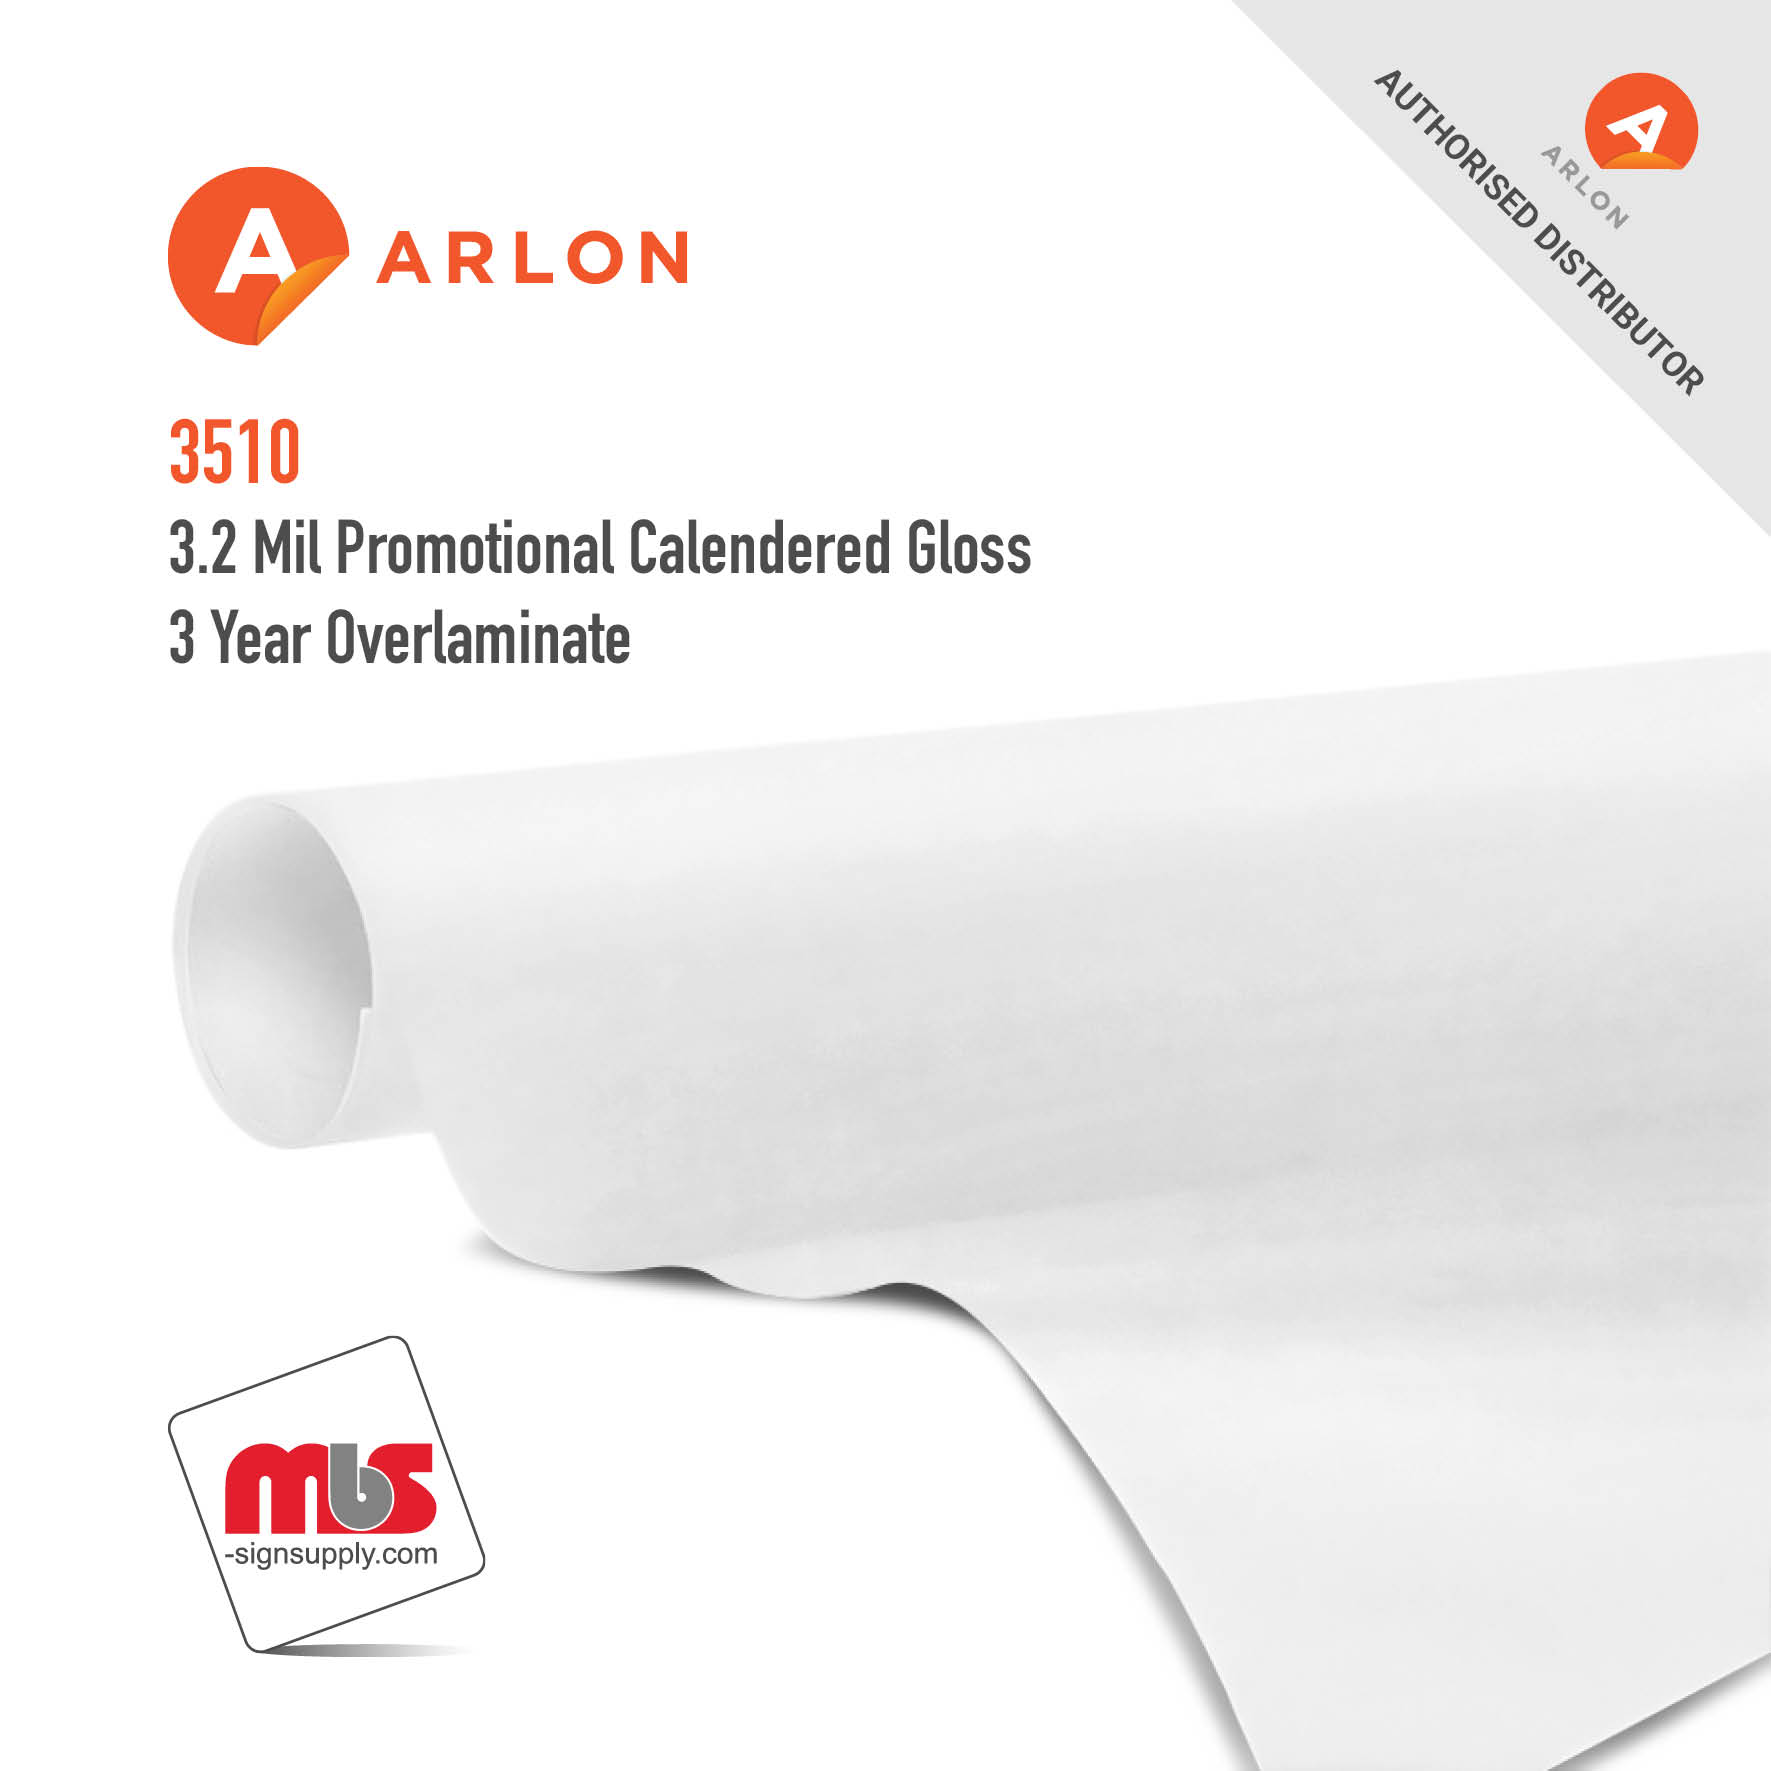 60'' x 50 Yard Roll - Arlon 3510 3.2 Mil Promotional Calendered Gloss 3 Year Overlaminate